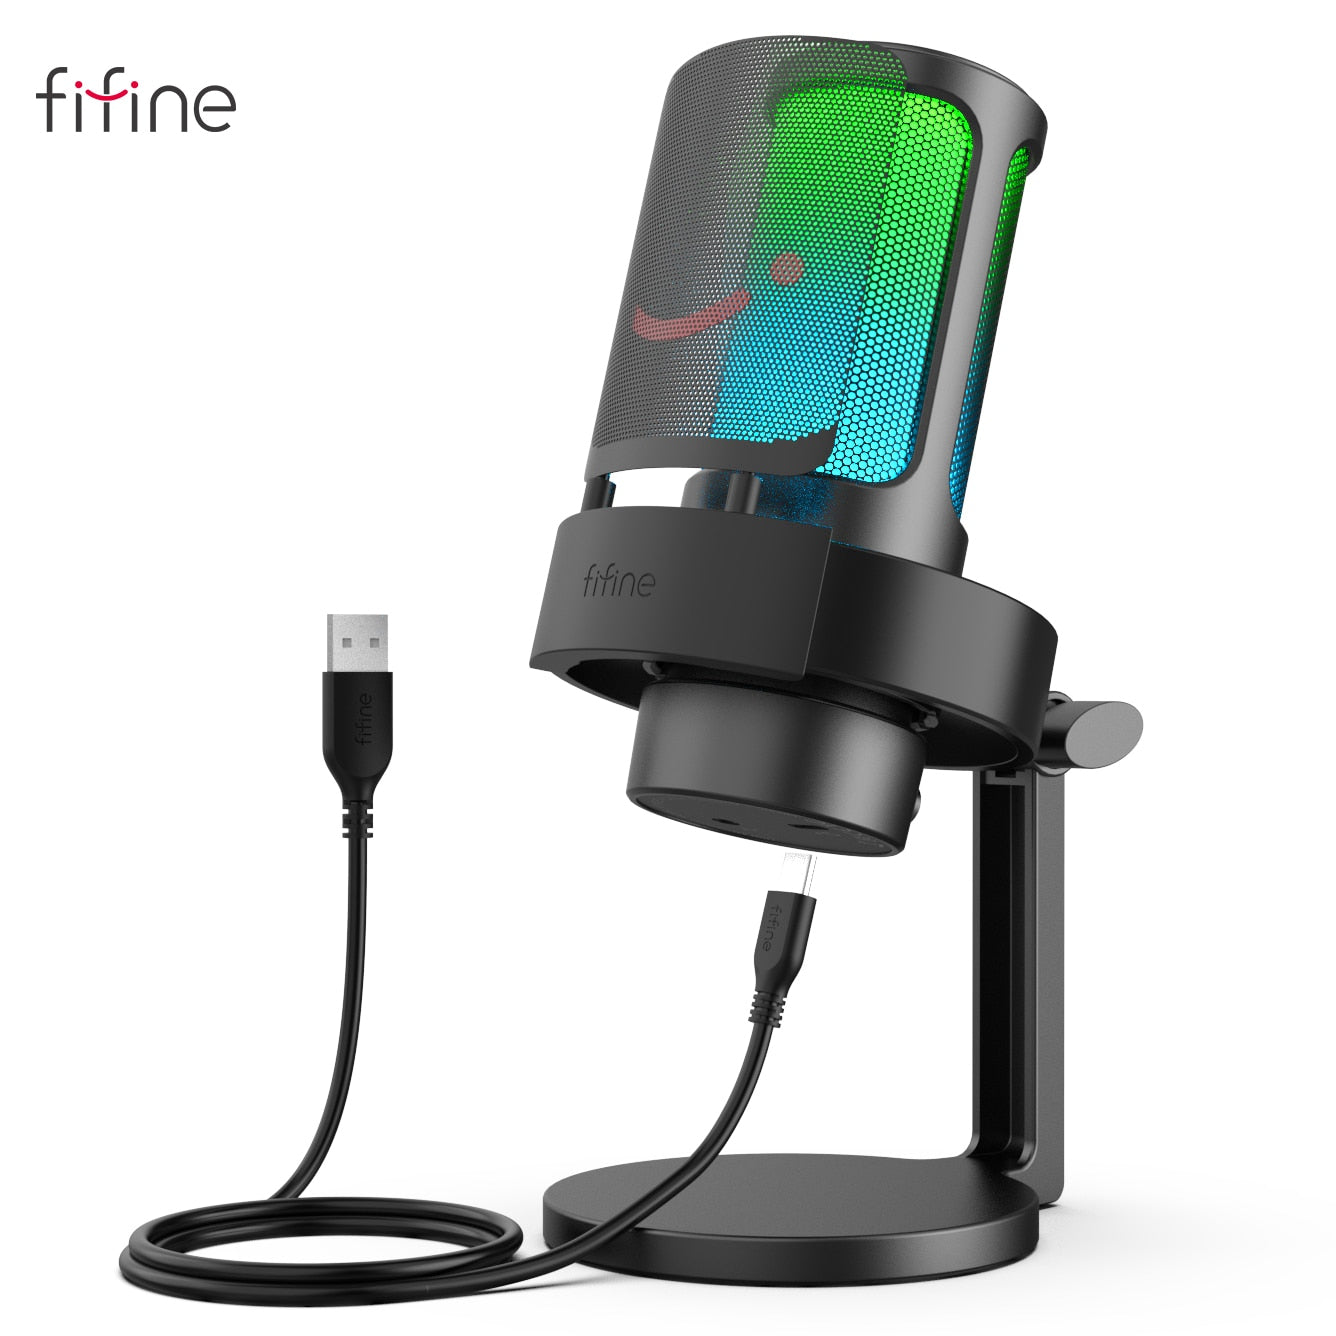 "FIFINE" USB Microphone for Recording and Streaming -A8 - League of Legends Fan Store